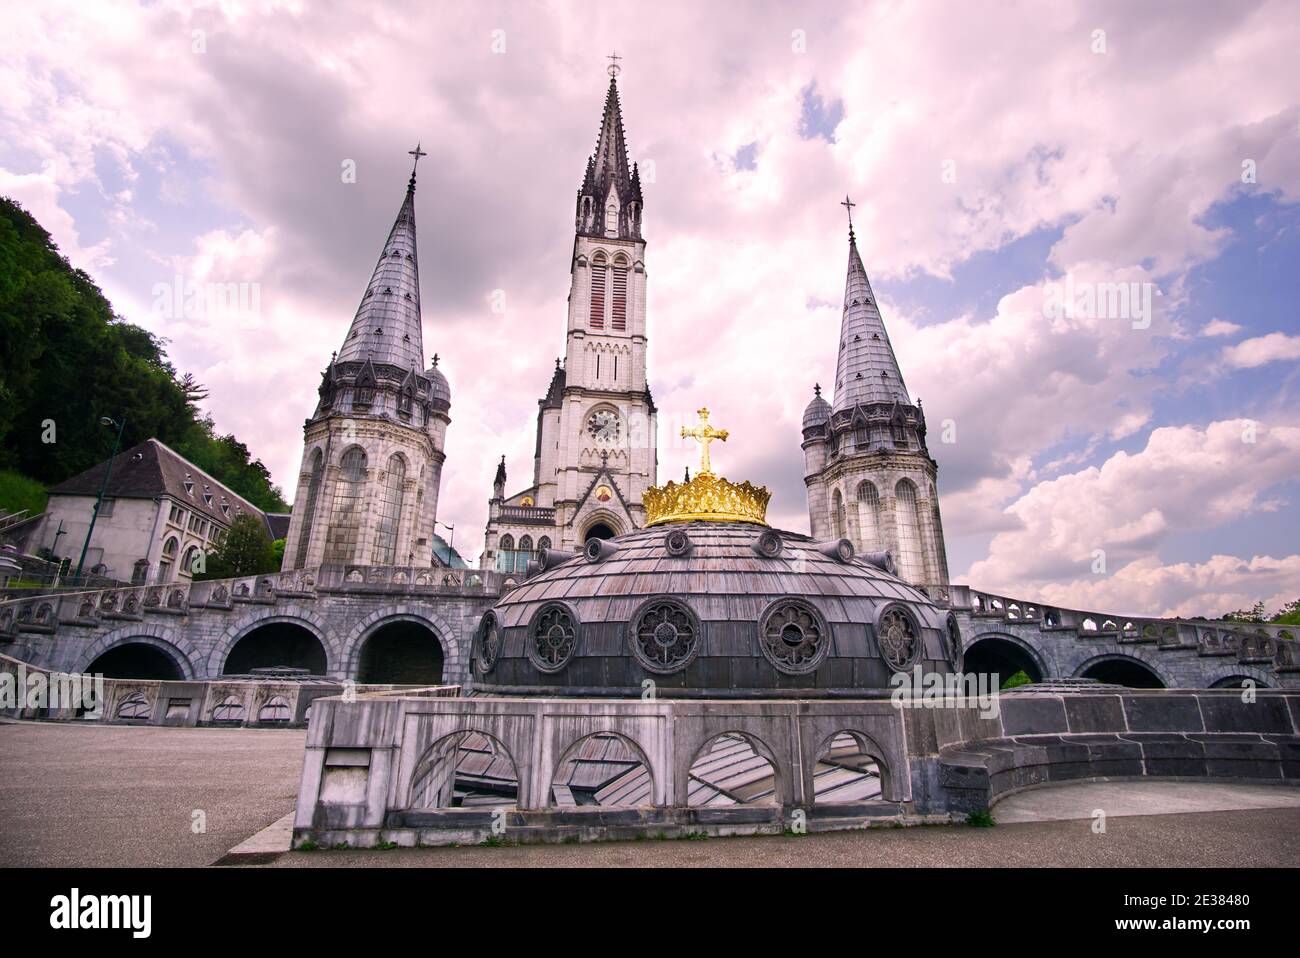 The Basilica of Our Lady of Immaculate Conception. Lourdes, France, major place of catholic pilgrimage. Stock Photo